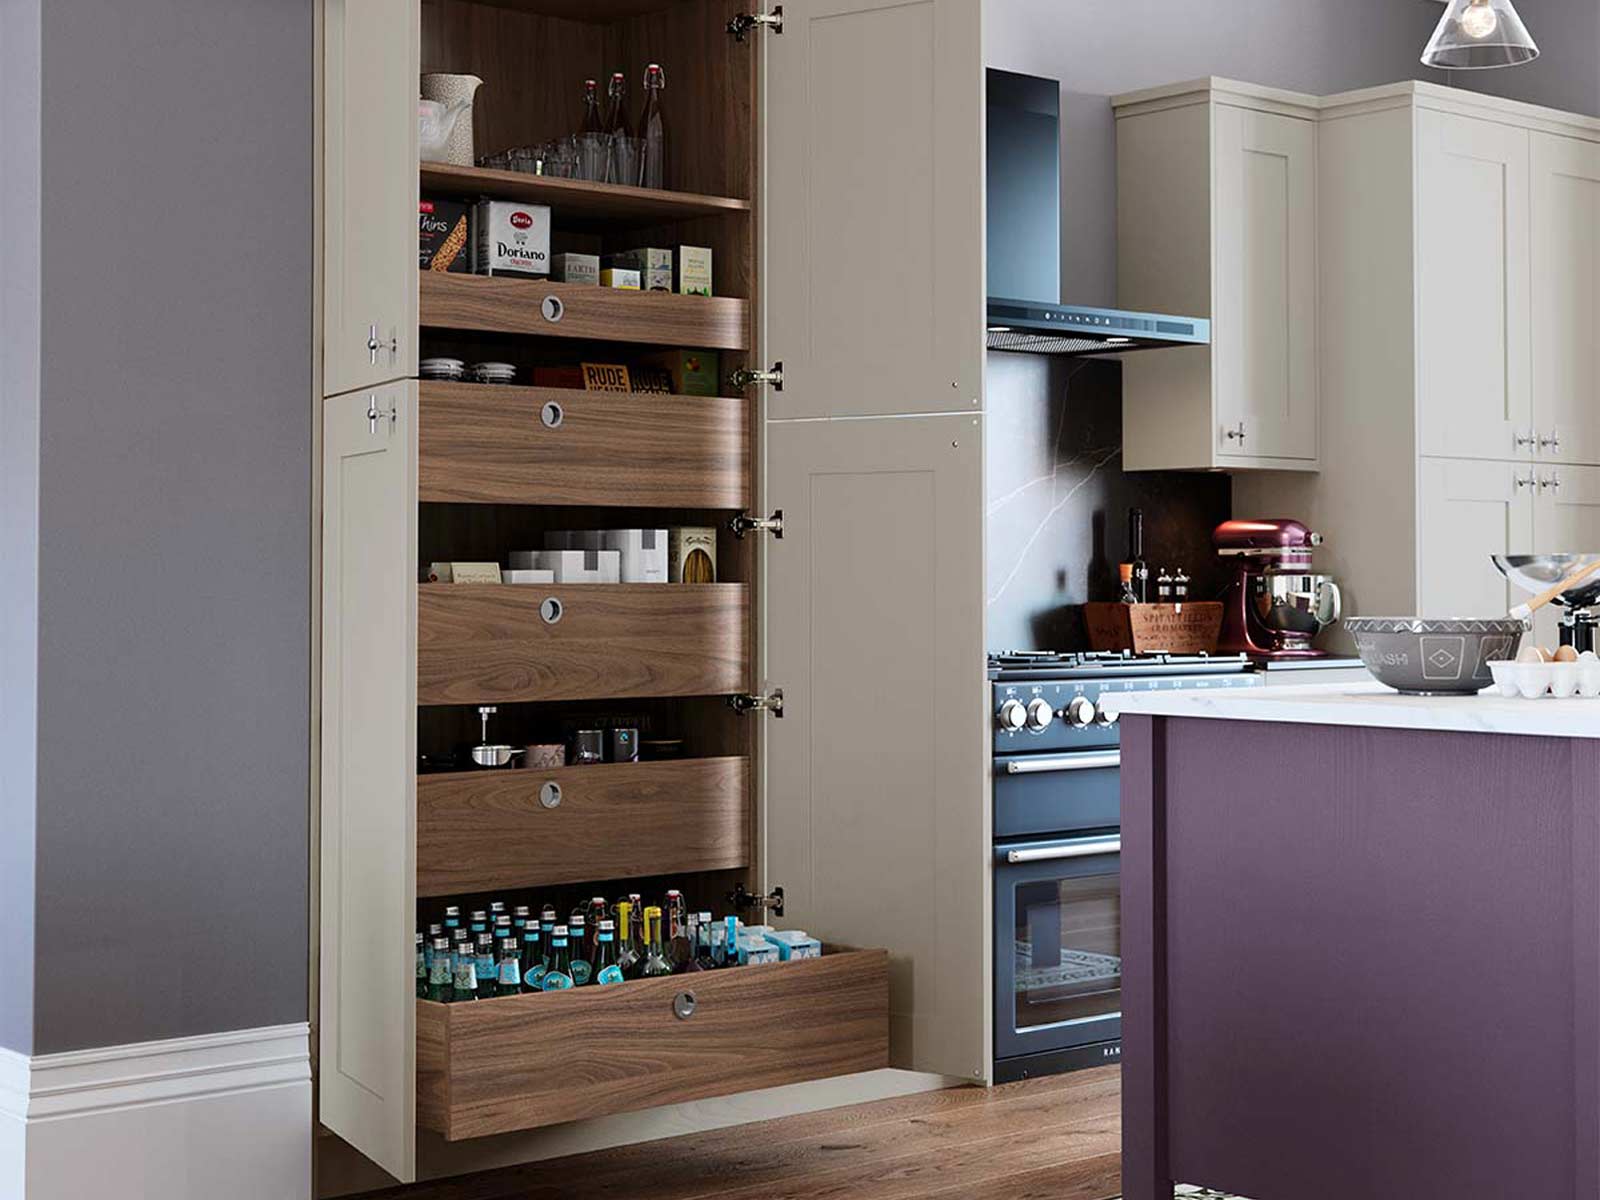 The larder kitchen unit storage pull-out option with walnut drawers